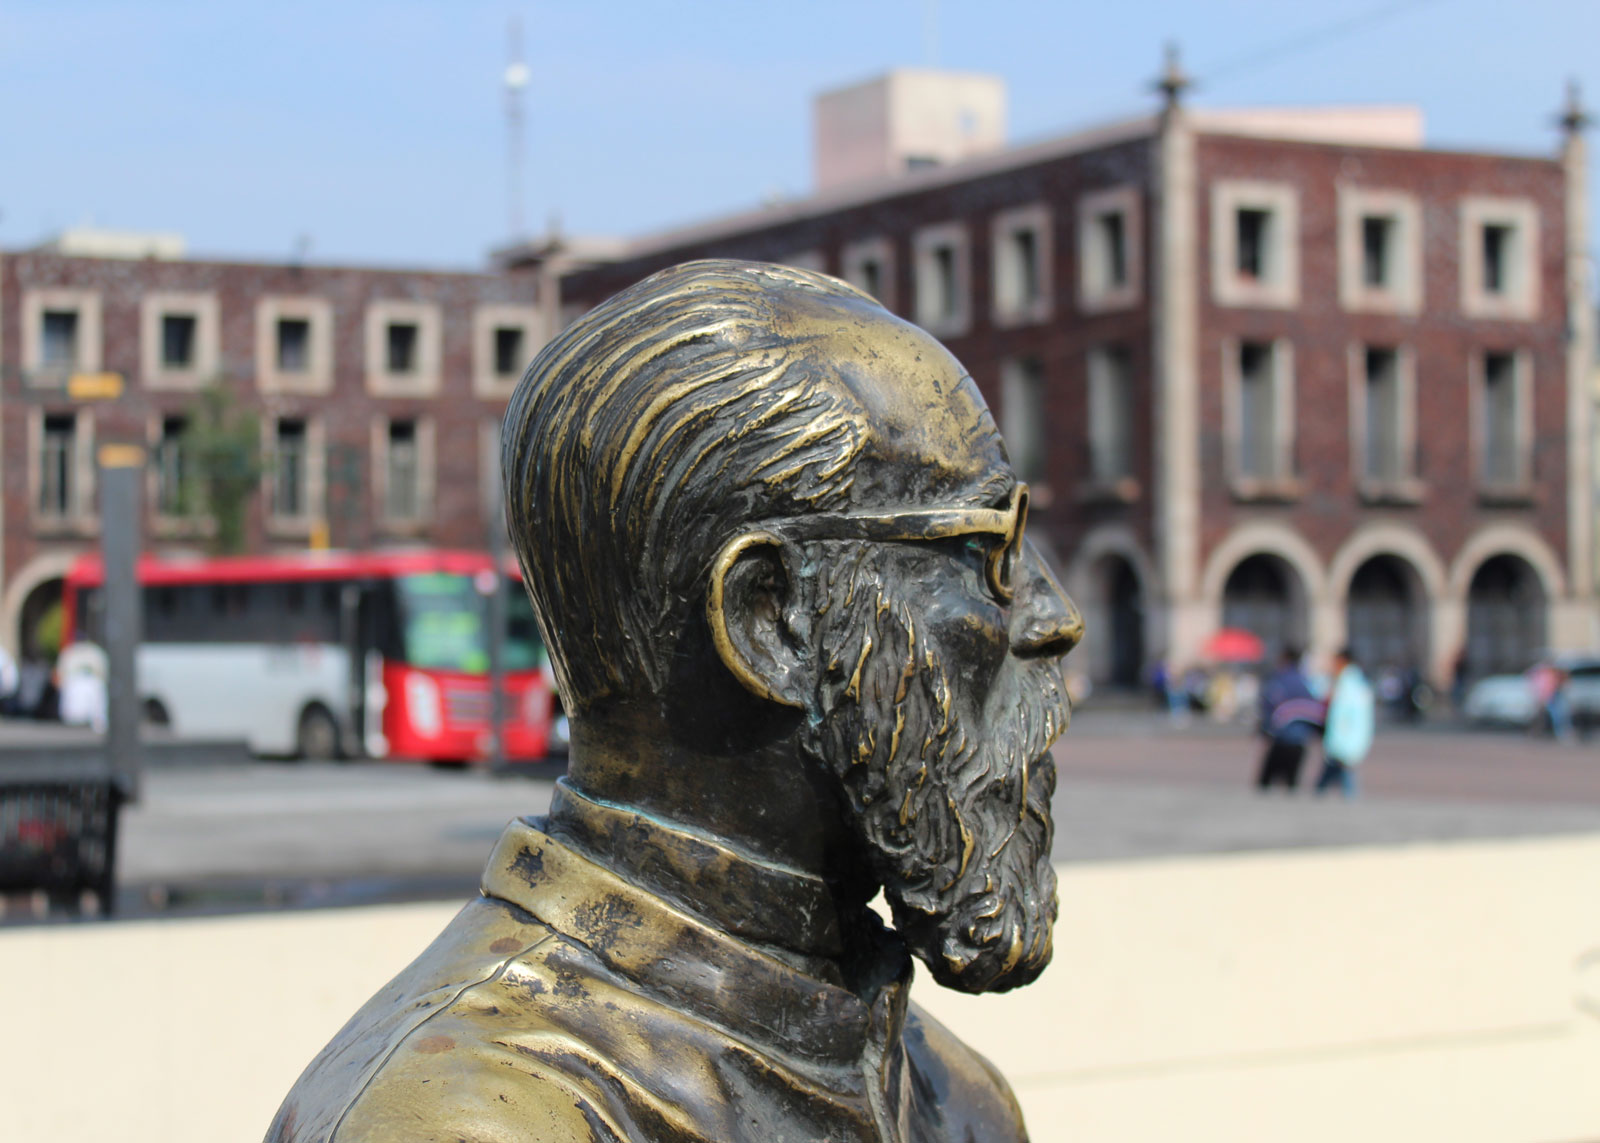 Bronze statue of old man by a bench in main square, Toluca, Mexico (August 2017)